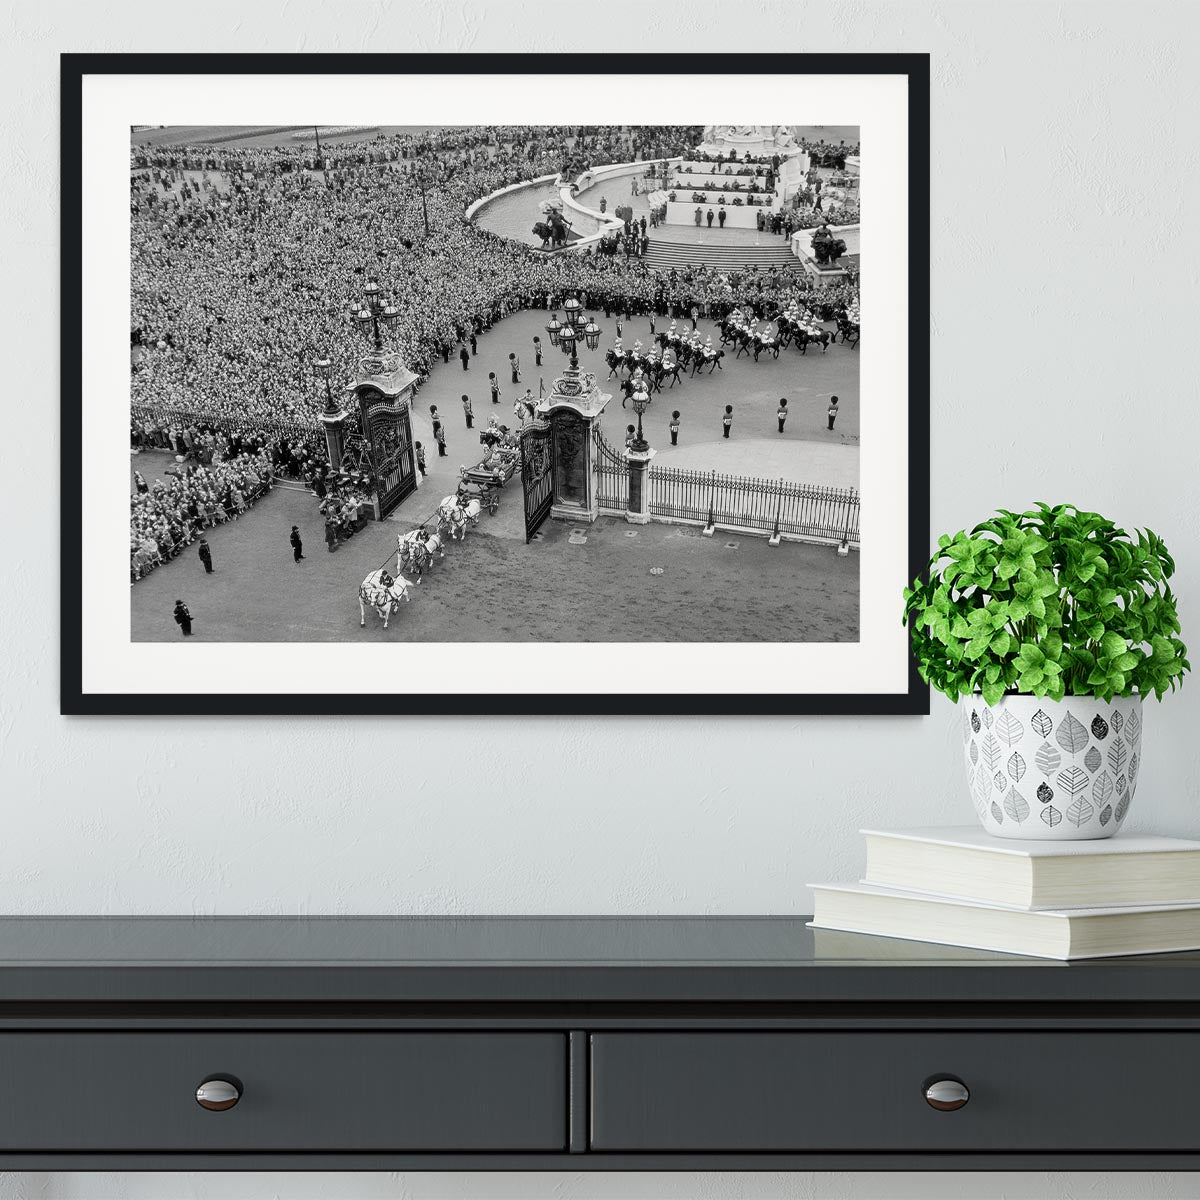 Queen Elizabeth II Coronation arriving home from a foreign tour Framed Print - Canvas Art Rocks - 1